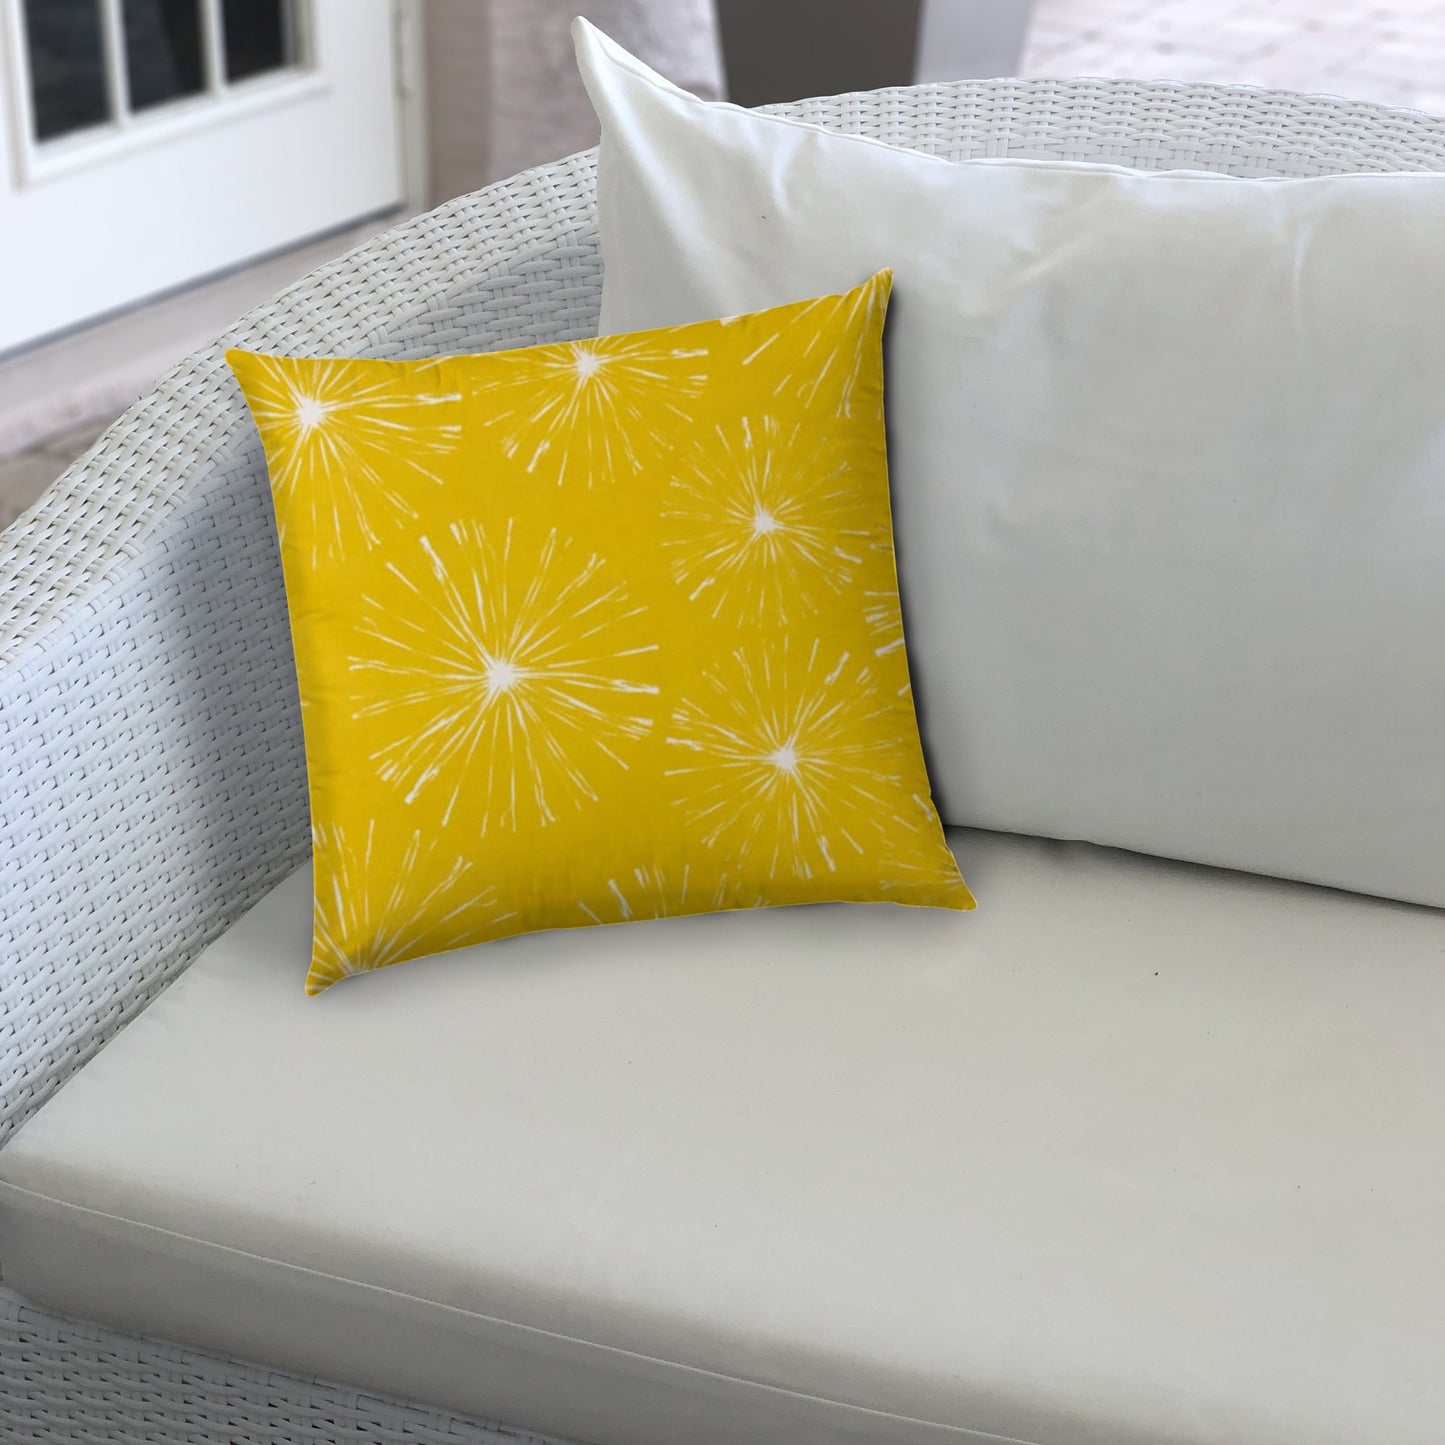 14" X 20" Cream And White Blown Seam Floral Lumbar Indoor Outdoor Pillow